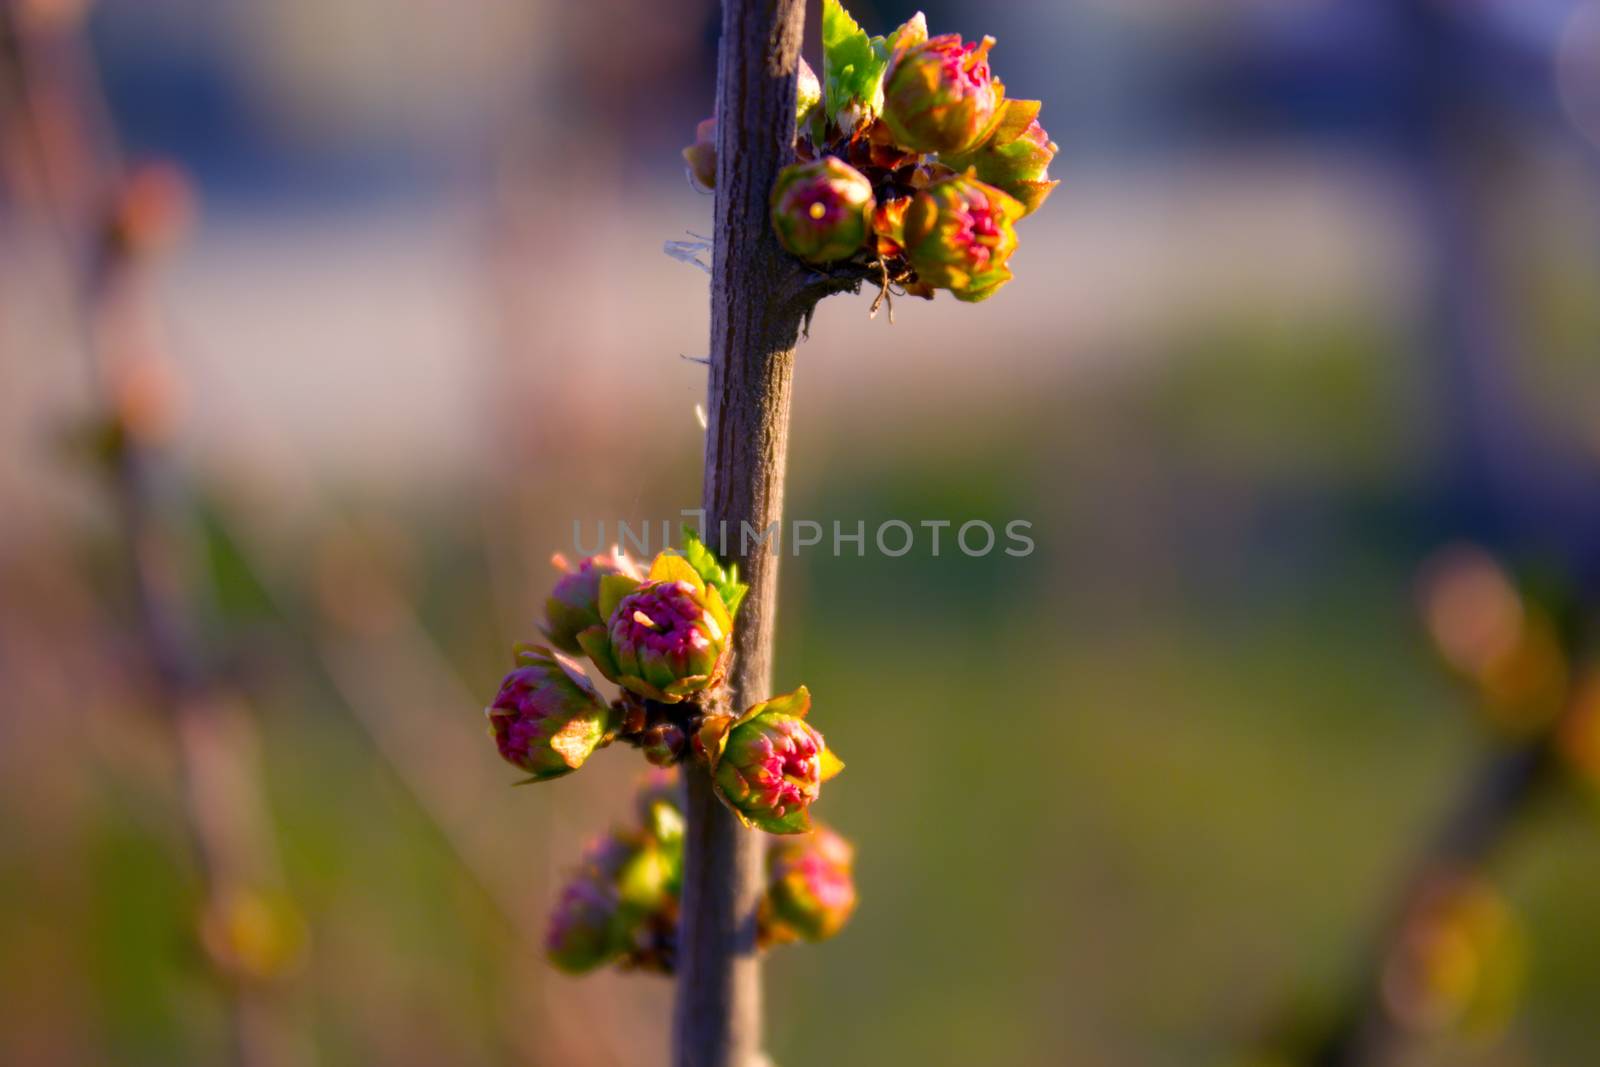 Bud of the Flower, green buds of a branch in spring